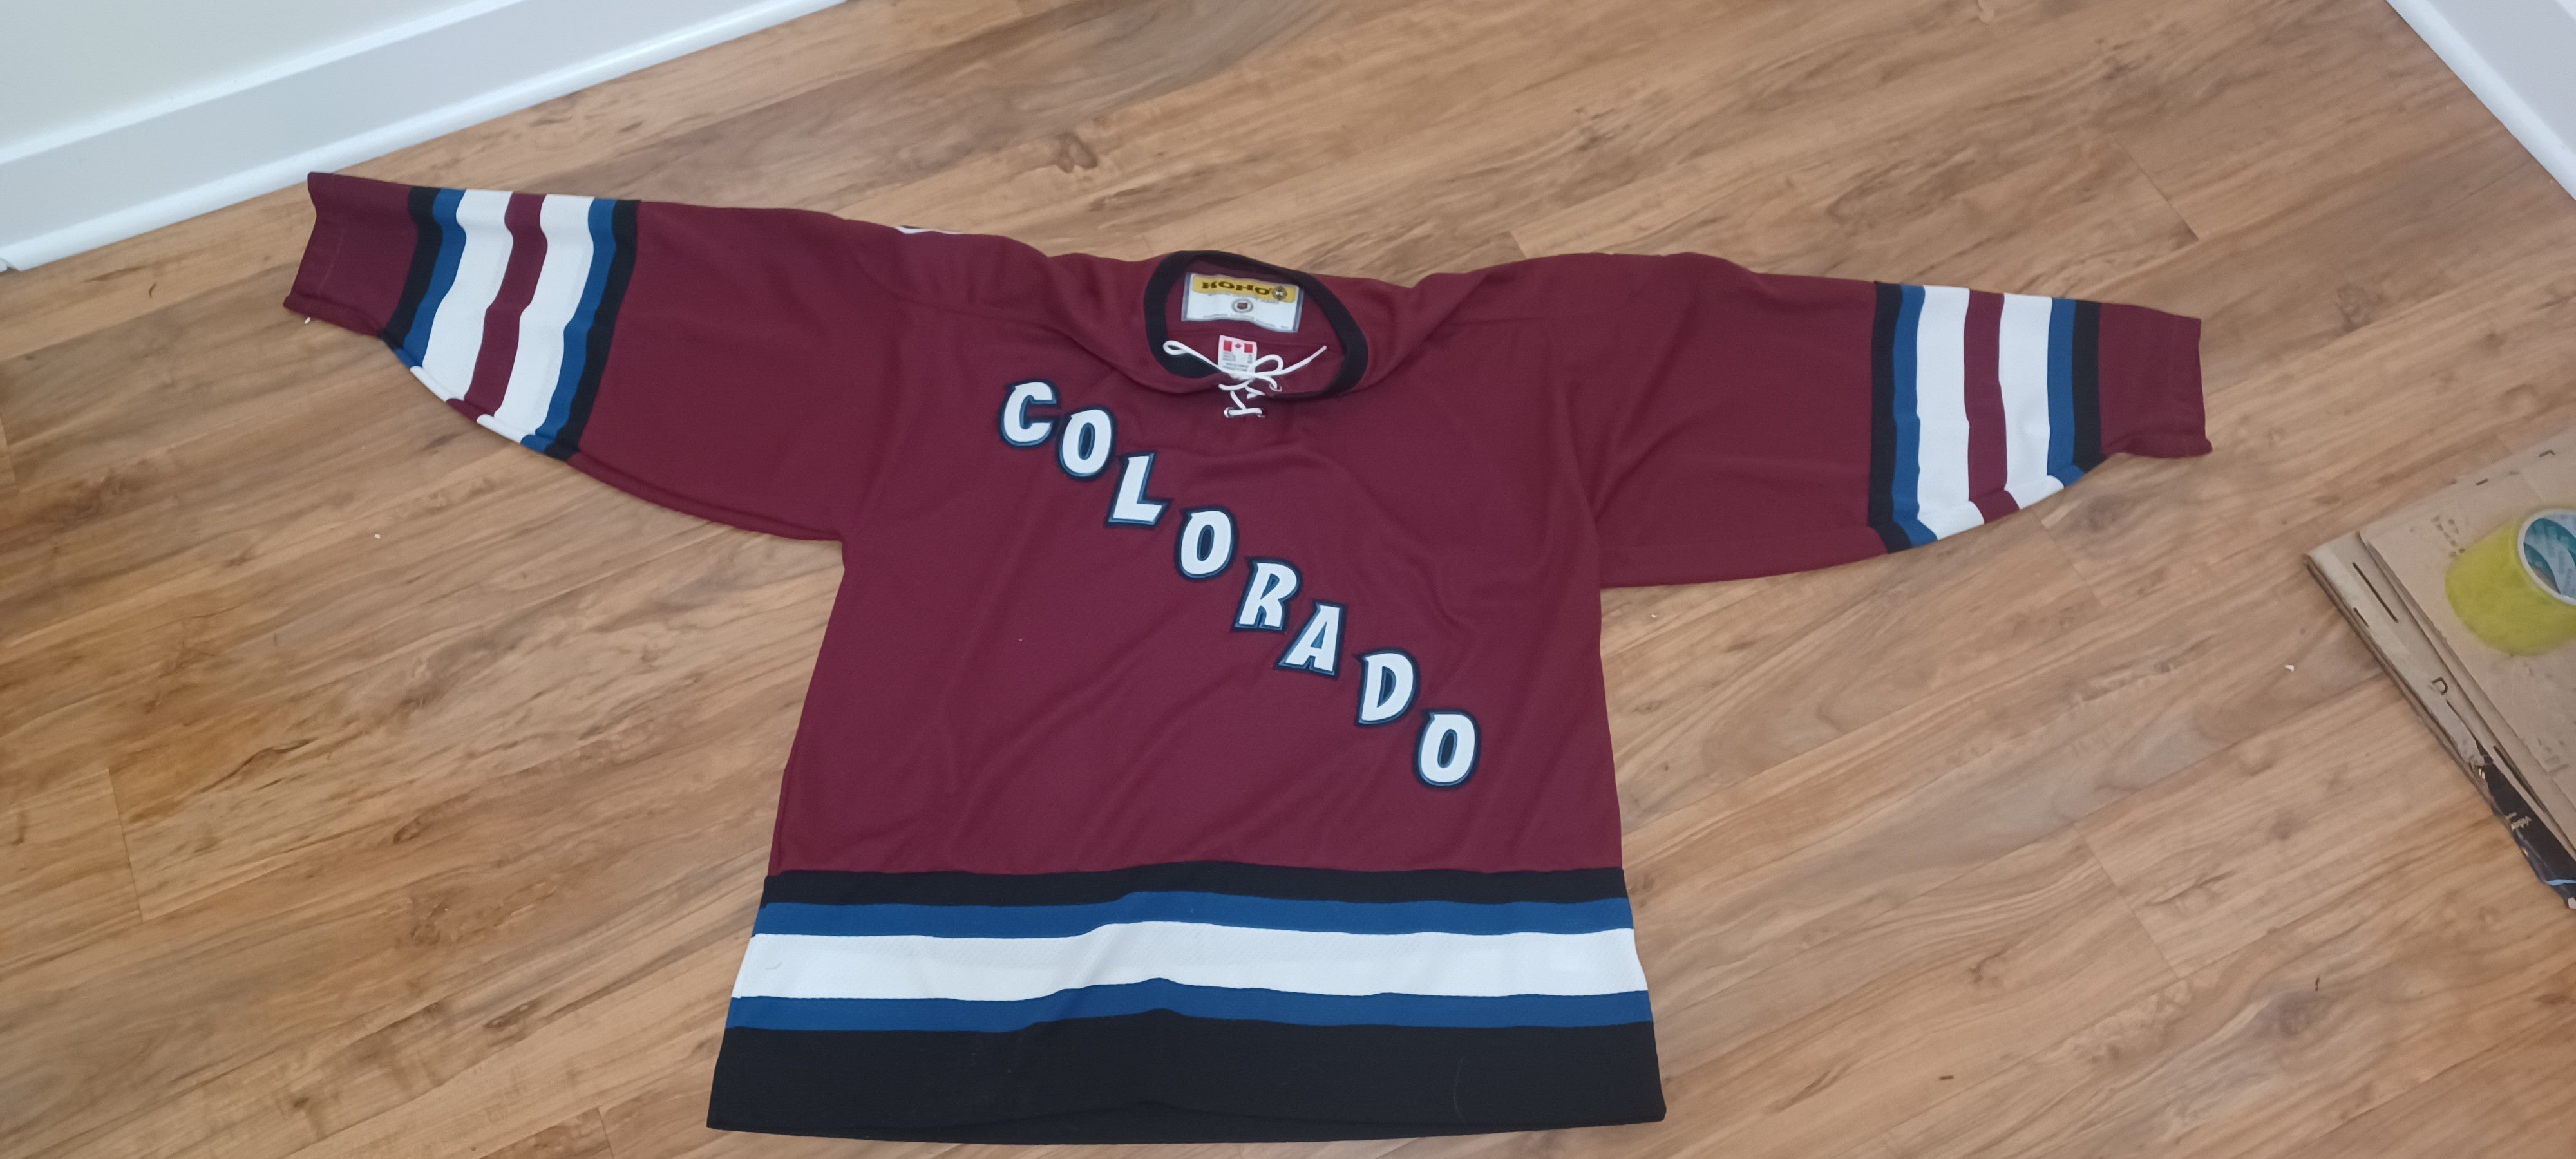 New Official Maroon NHL Practice New Jersey Colorado Avalanche (sizes 56 ,  58)